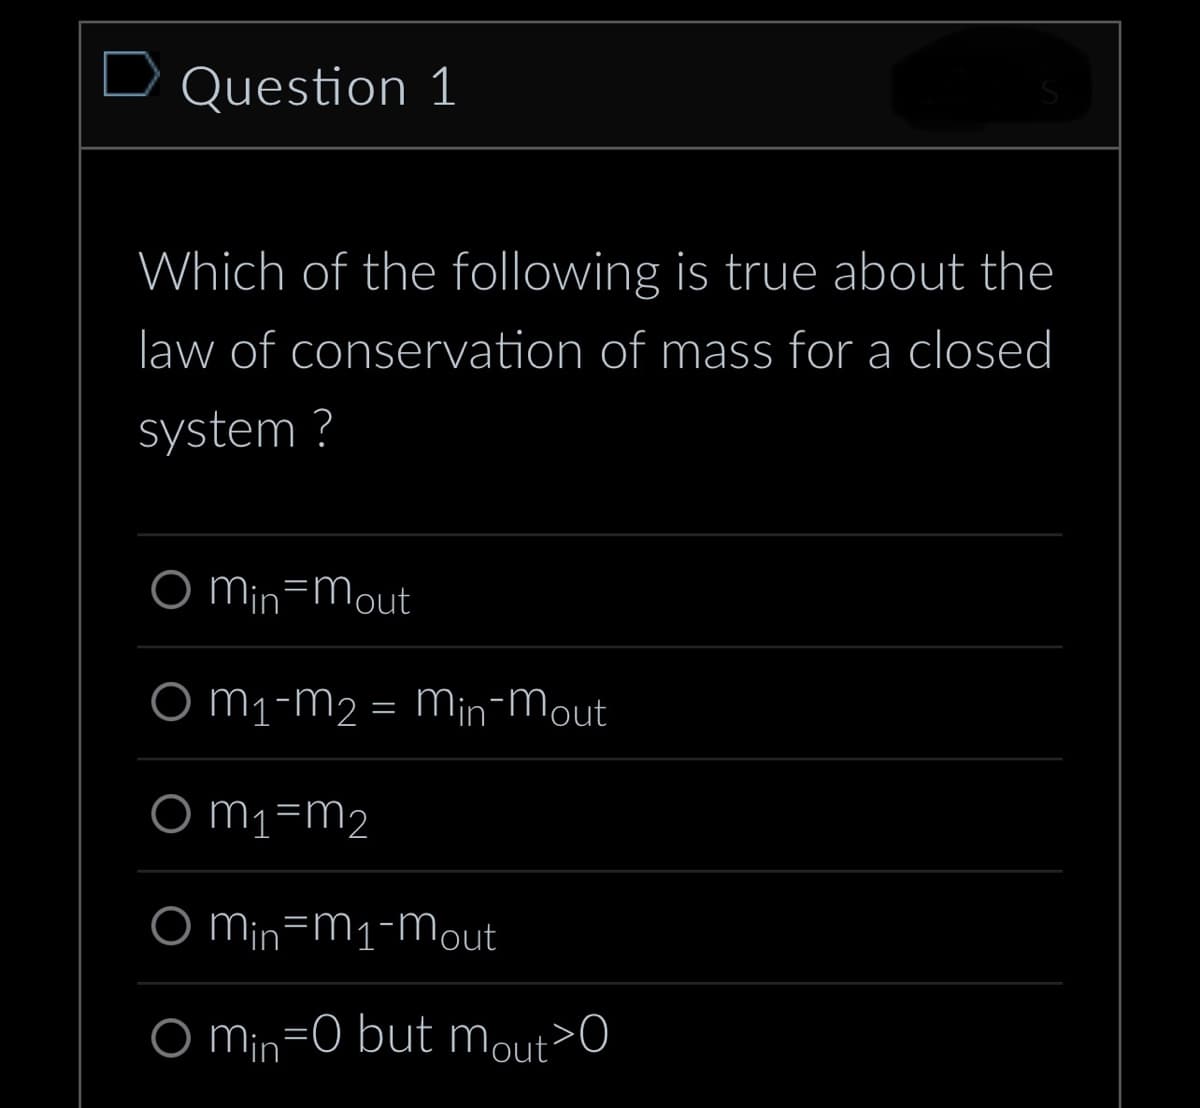 D Question 1
Which of the following is true about the
law of conservation of mass for a closed
system?
O Min mout
O M₁-M₂ = Min-Mout
Om₁=m₂
O min-m₁-mout
O min=0 but mout>0